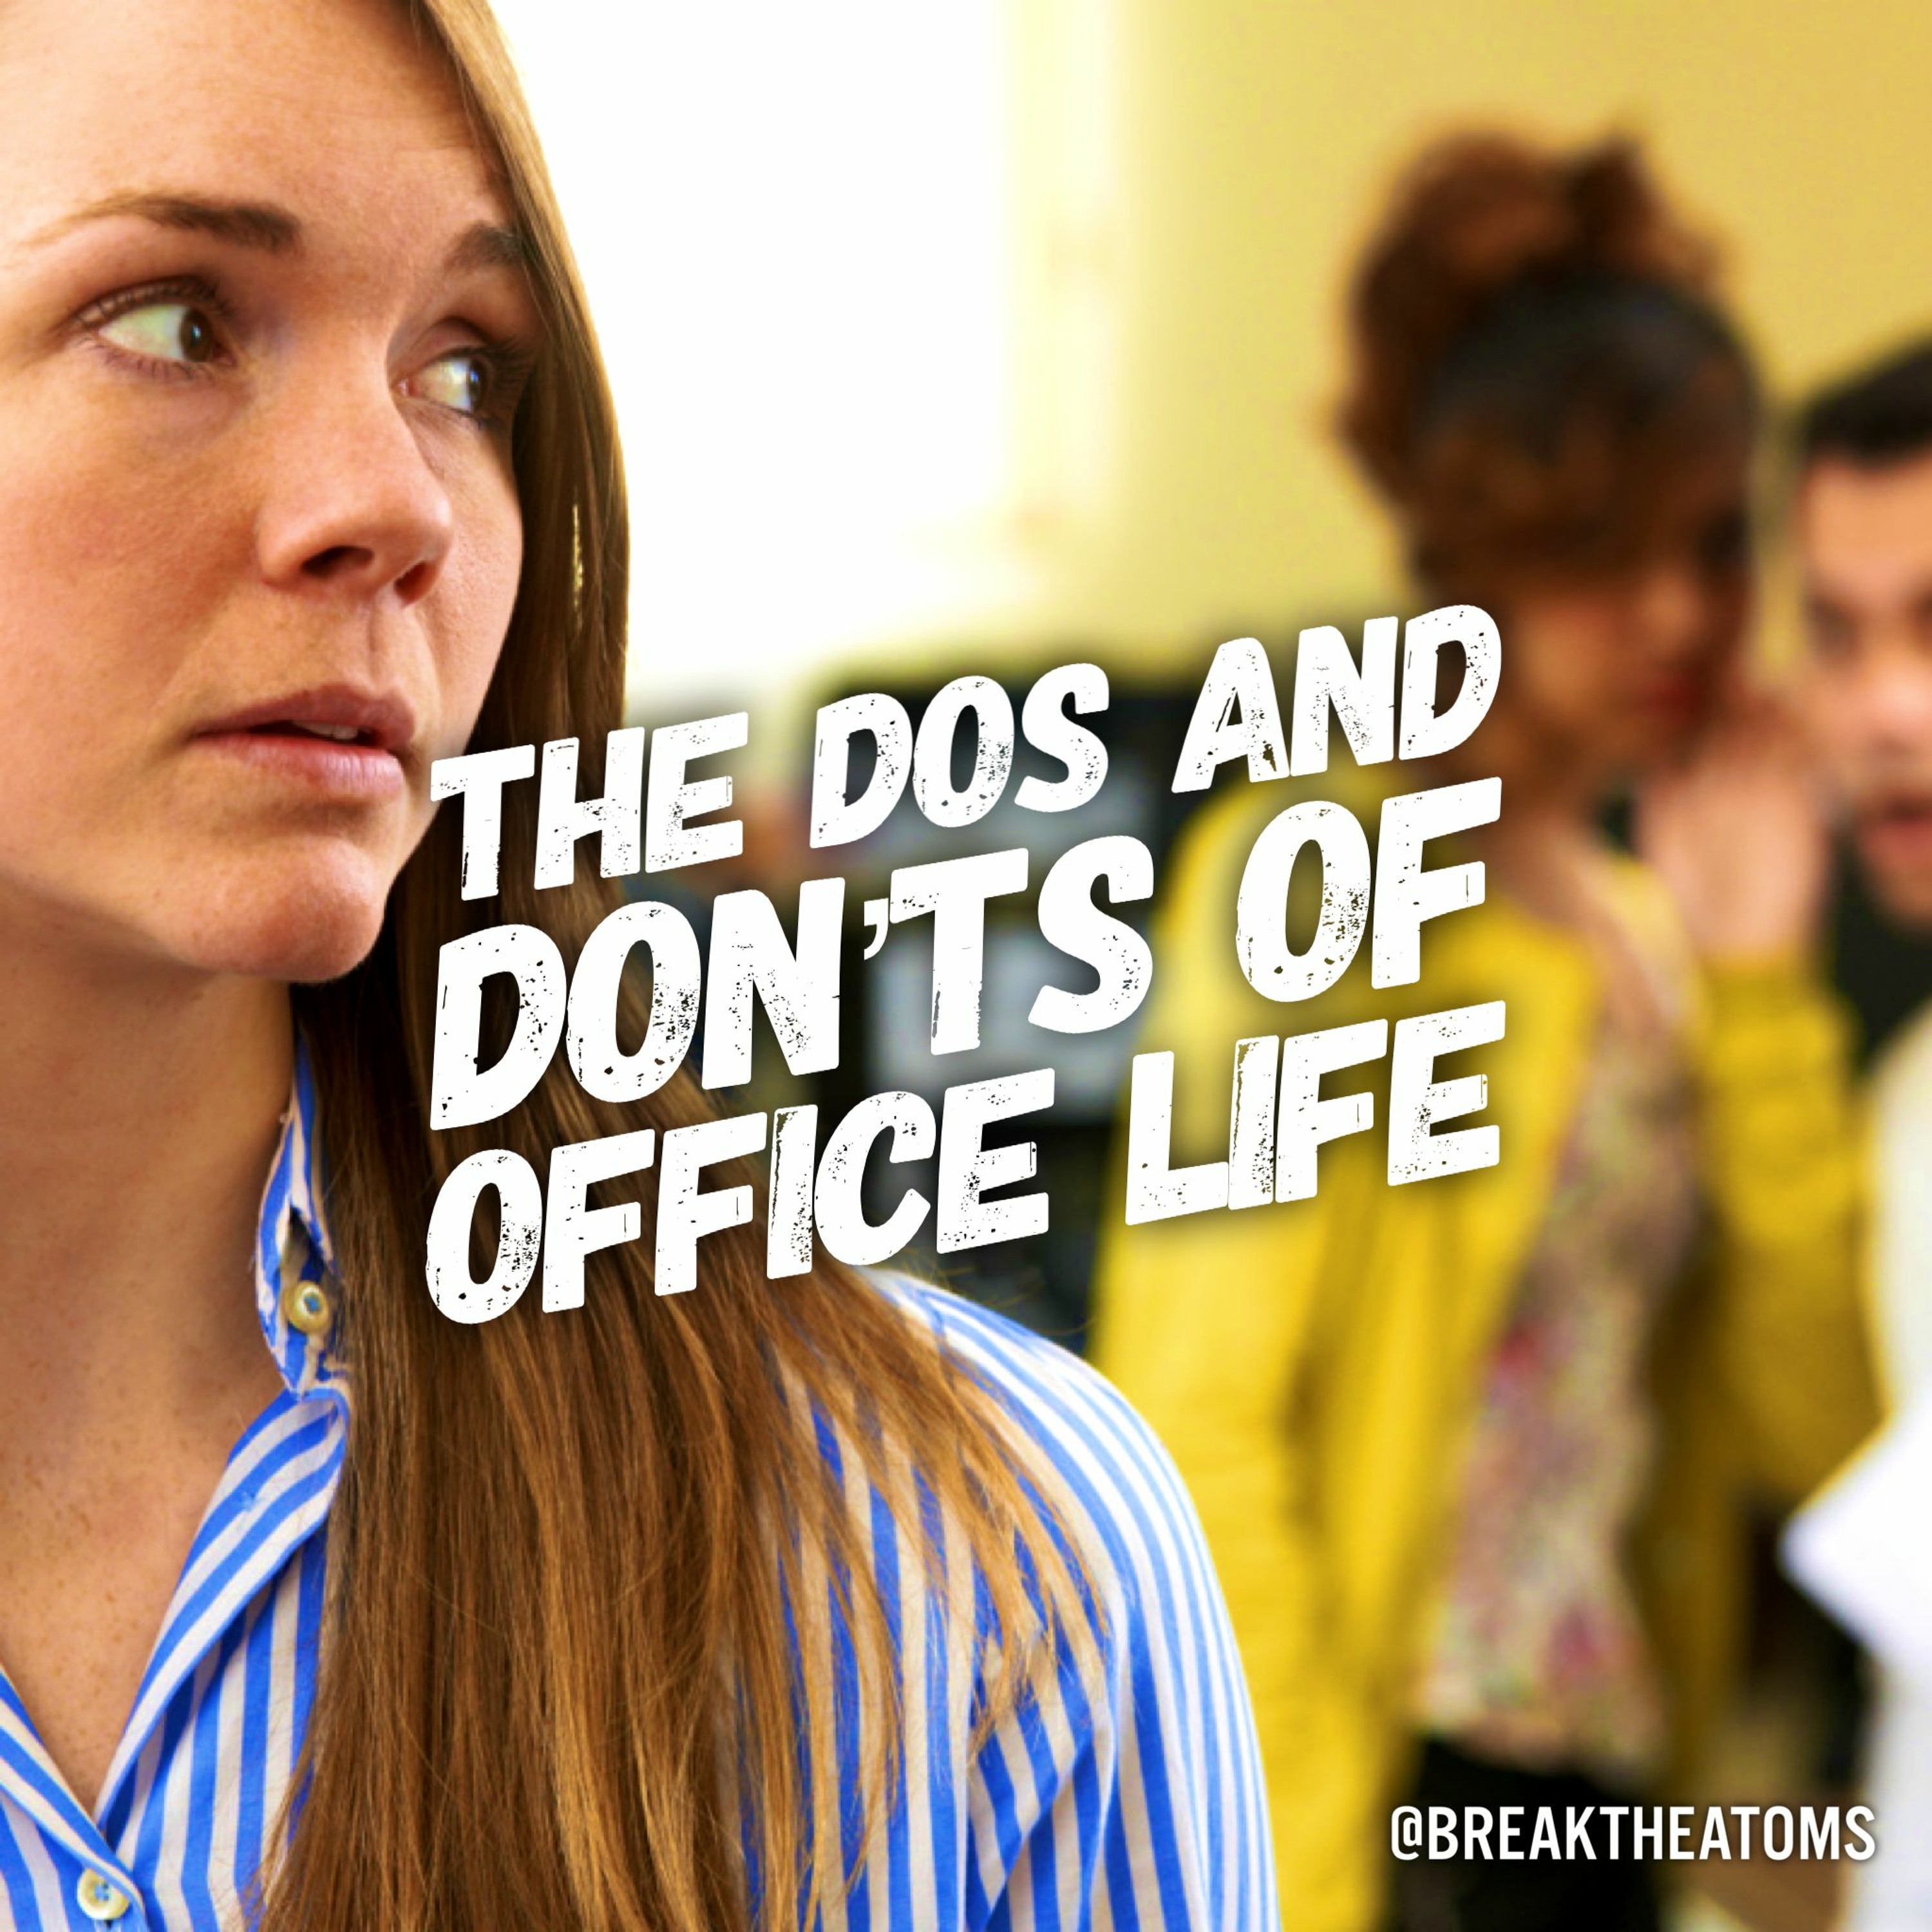 The Dos and Don'ts of Office Life